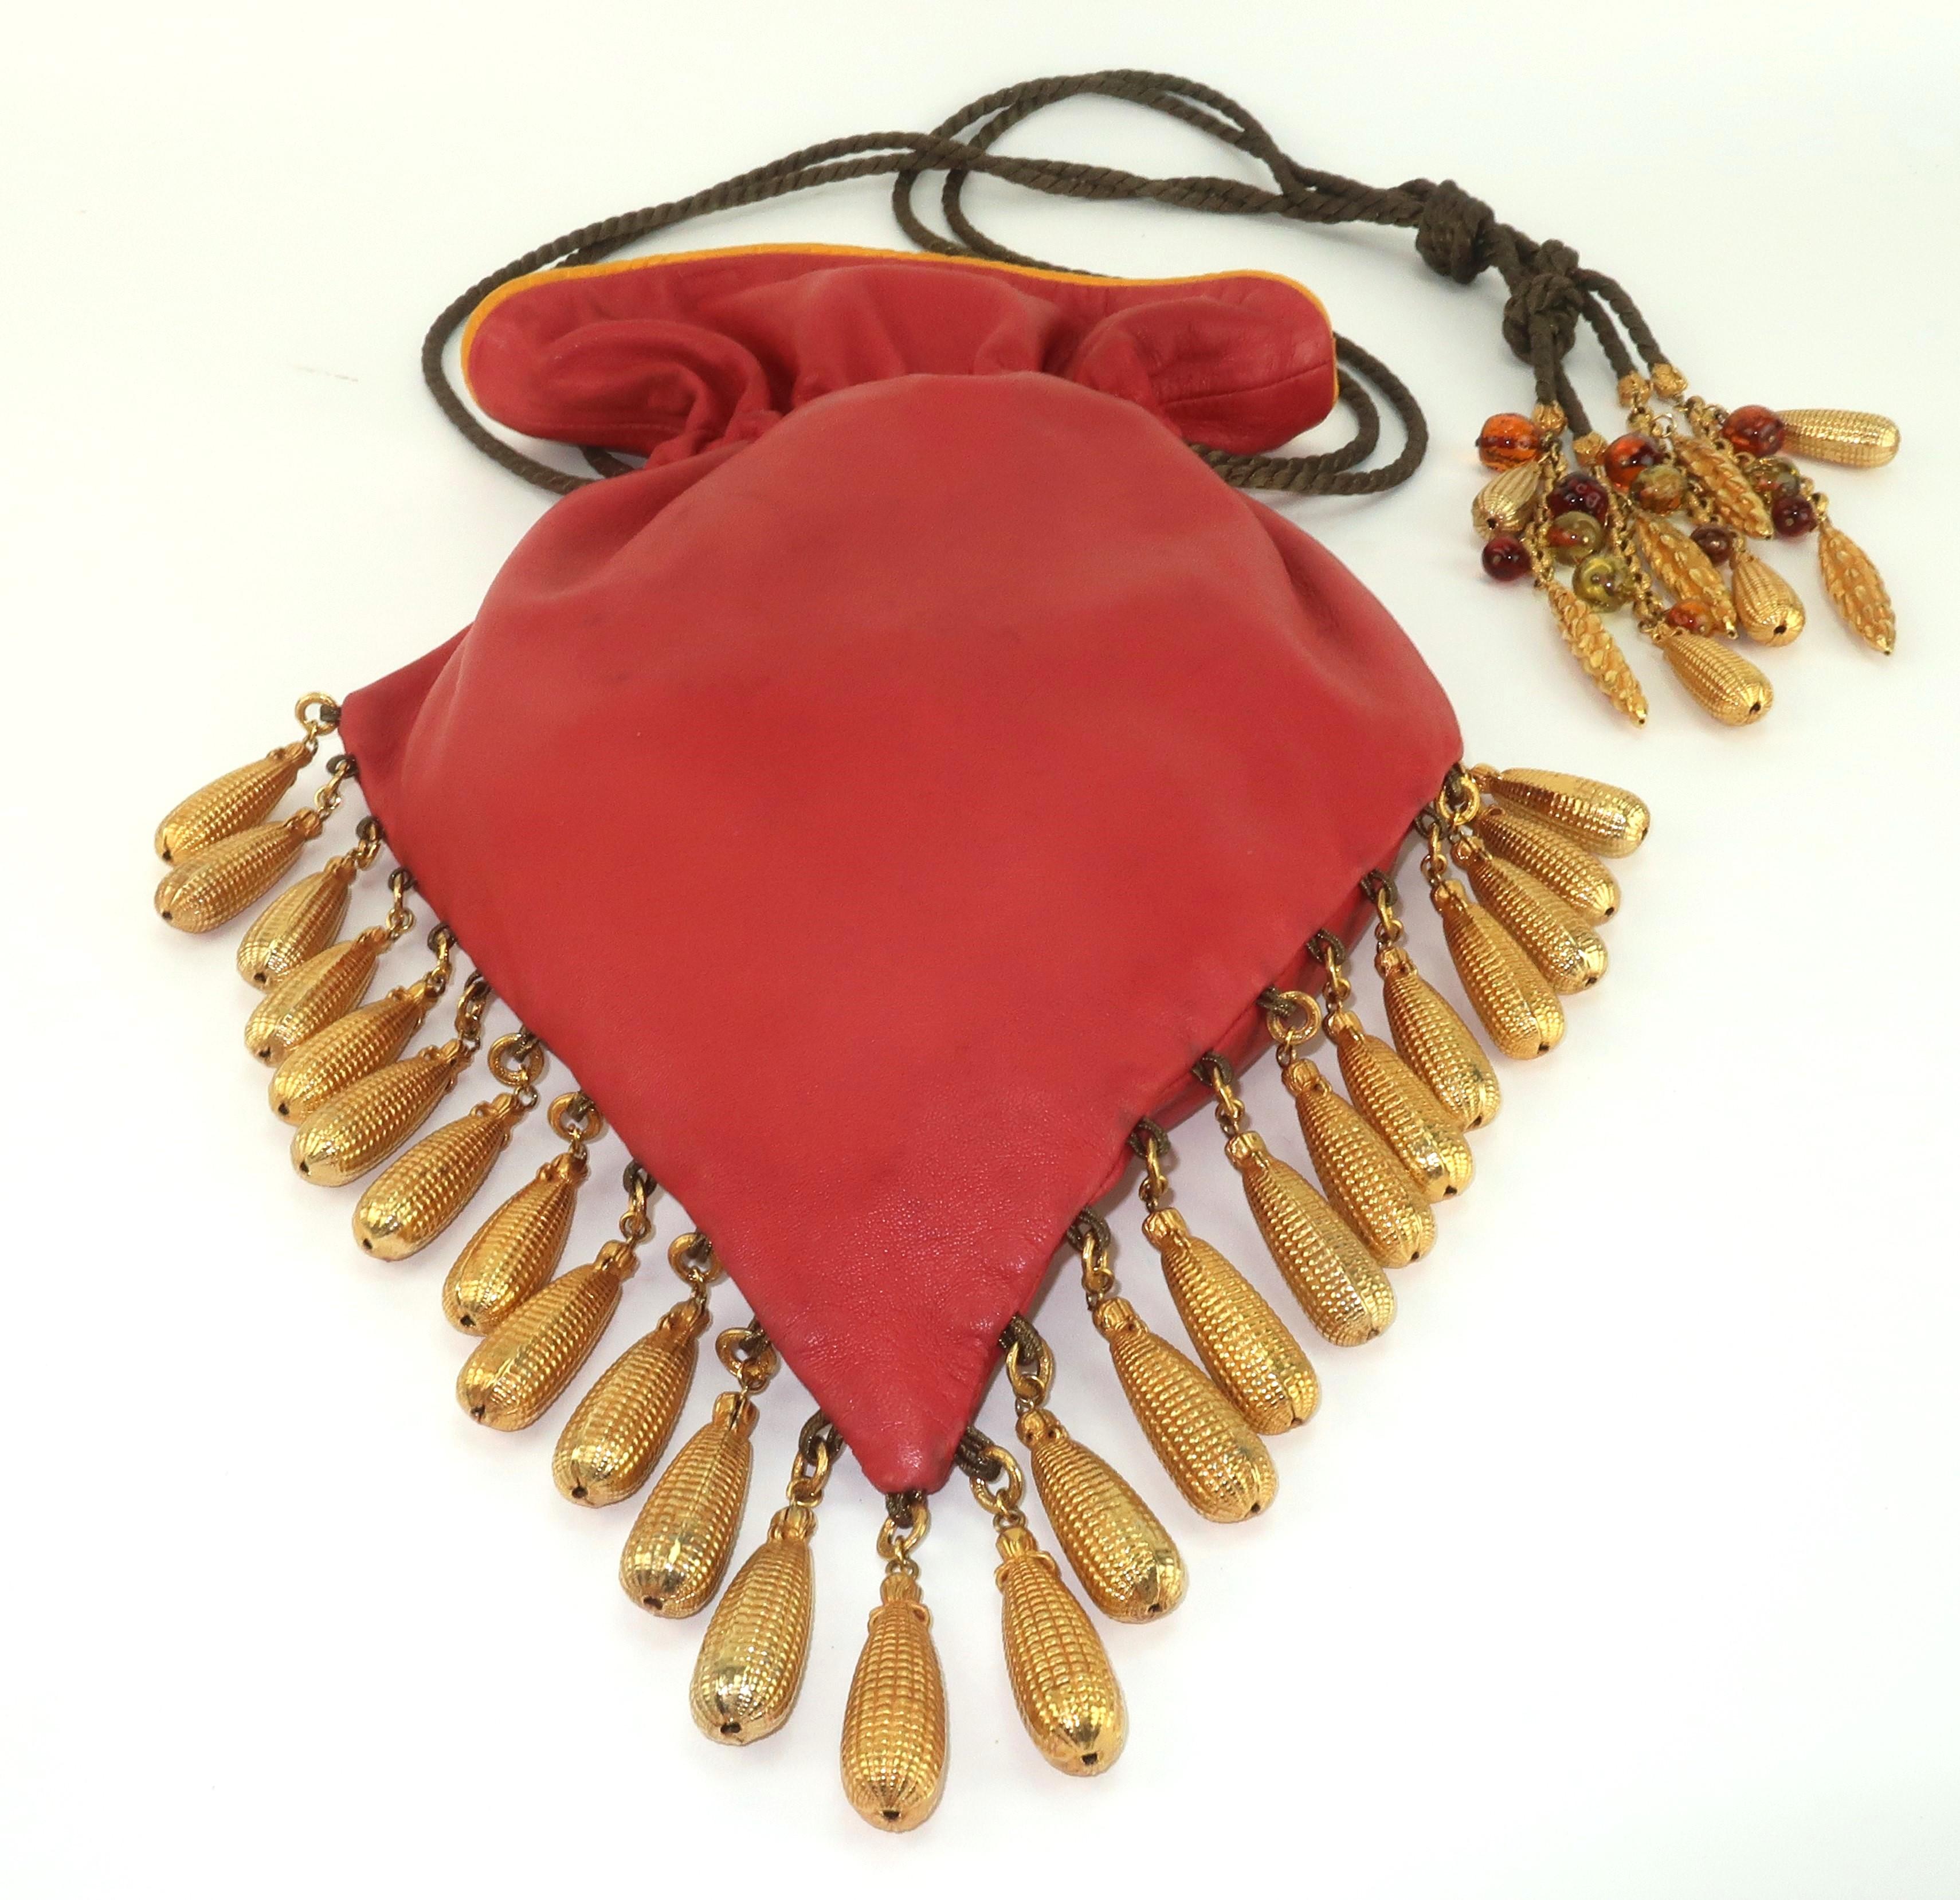 Late 1980's drawstring leather handbag by French jewelry designer, Dominique Aurientis, embellished with gold plated charms and glass beads.  This fabulous handbag is a testament to 1980's maximalist style with a combination of a functional